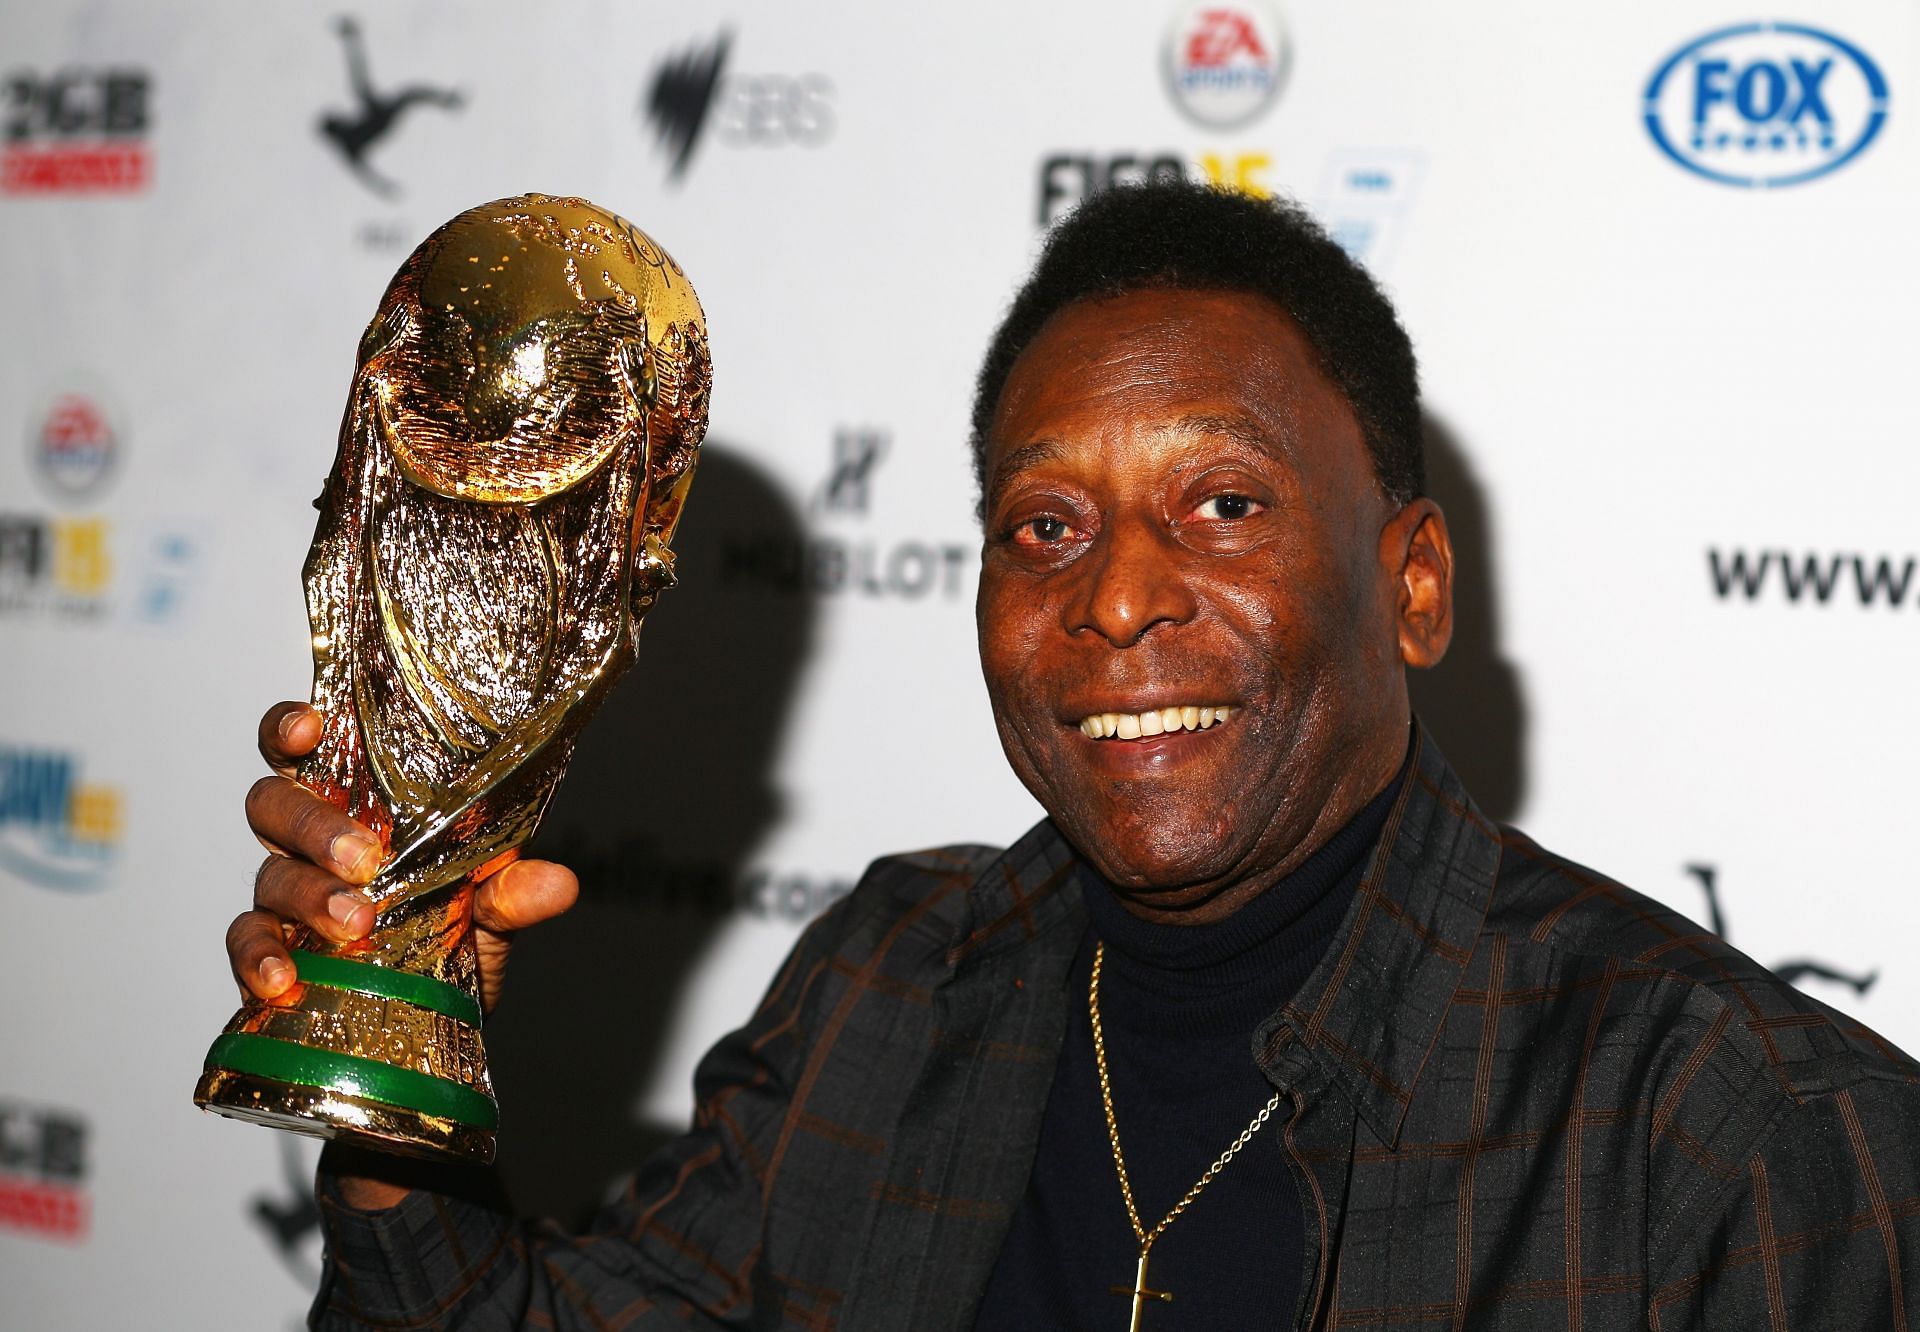 For many years, Pele was considered to be the greatest player of all time.